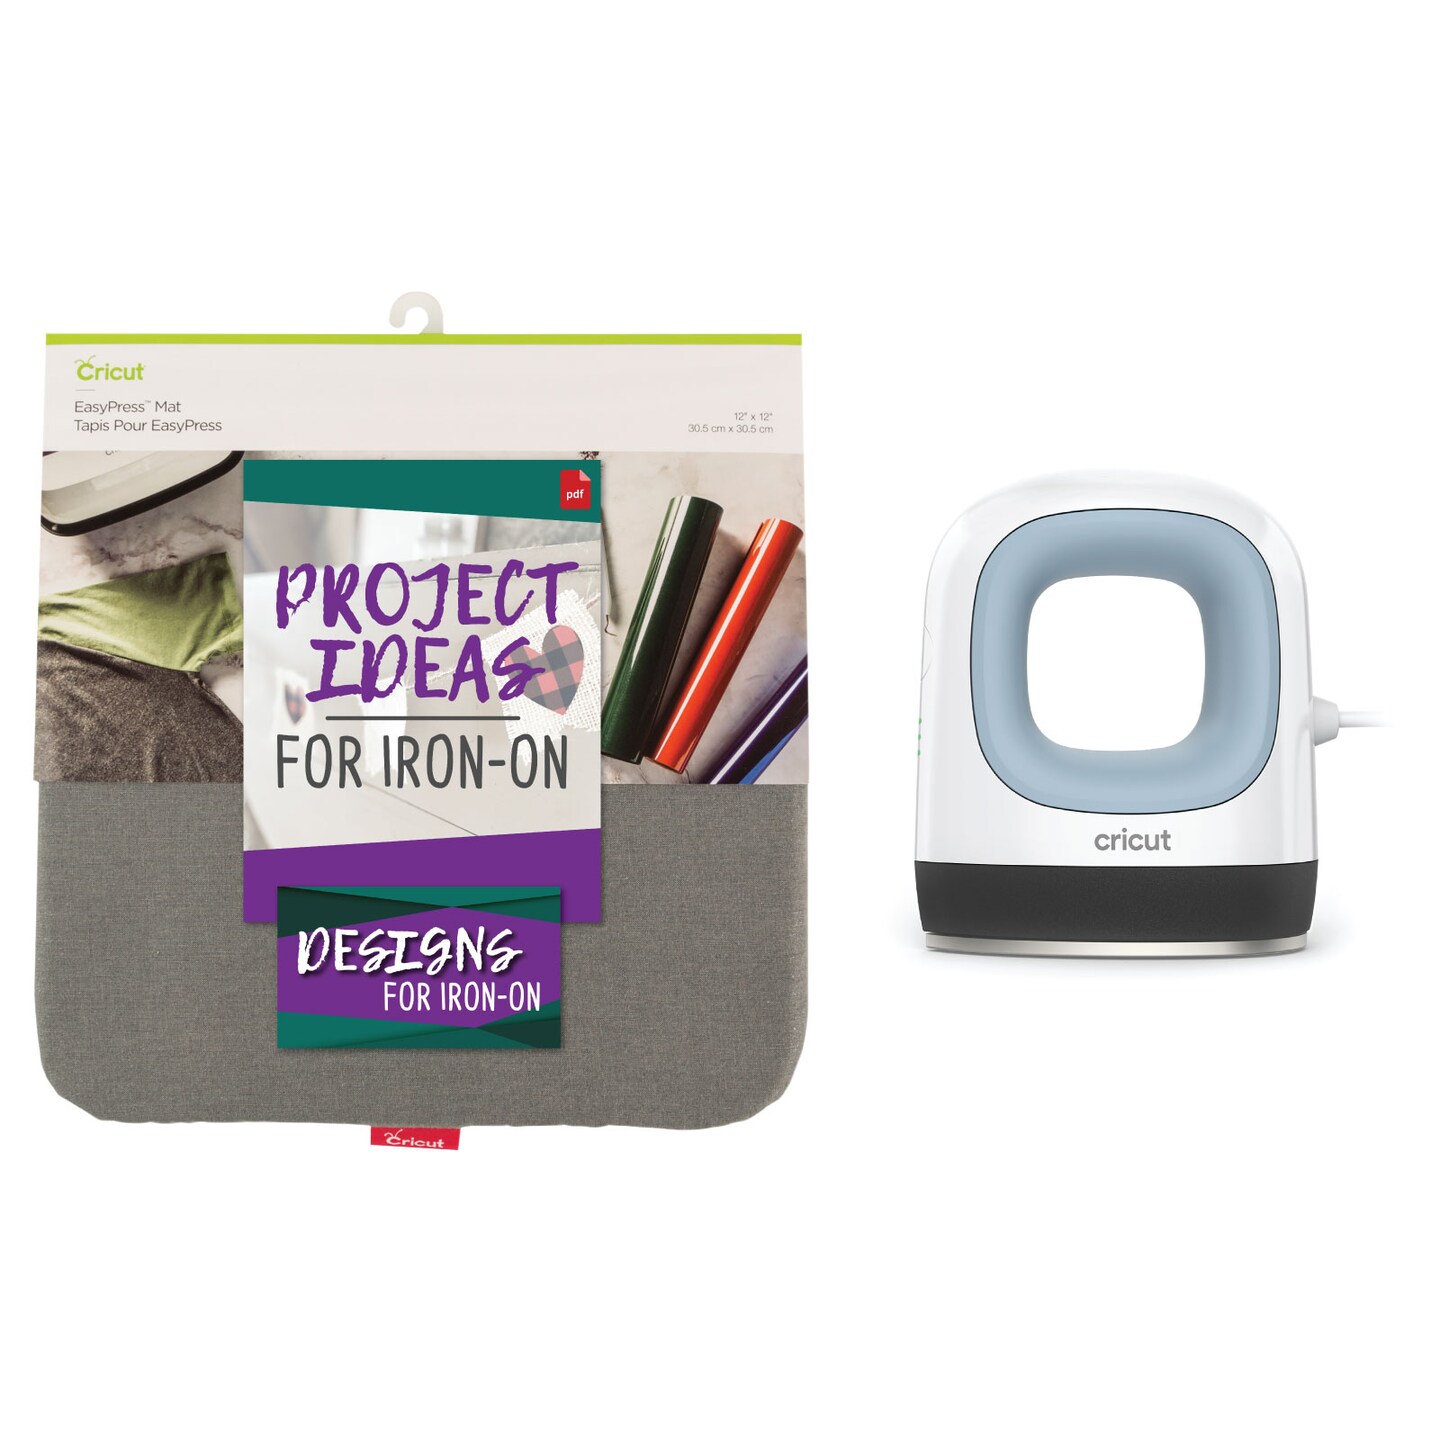 Cricut Easy Press 2 - Heat Press Machine For T Shirts and HTV Vinyl Pr –  Pete's Arts, Crafts and Sewing